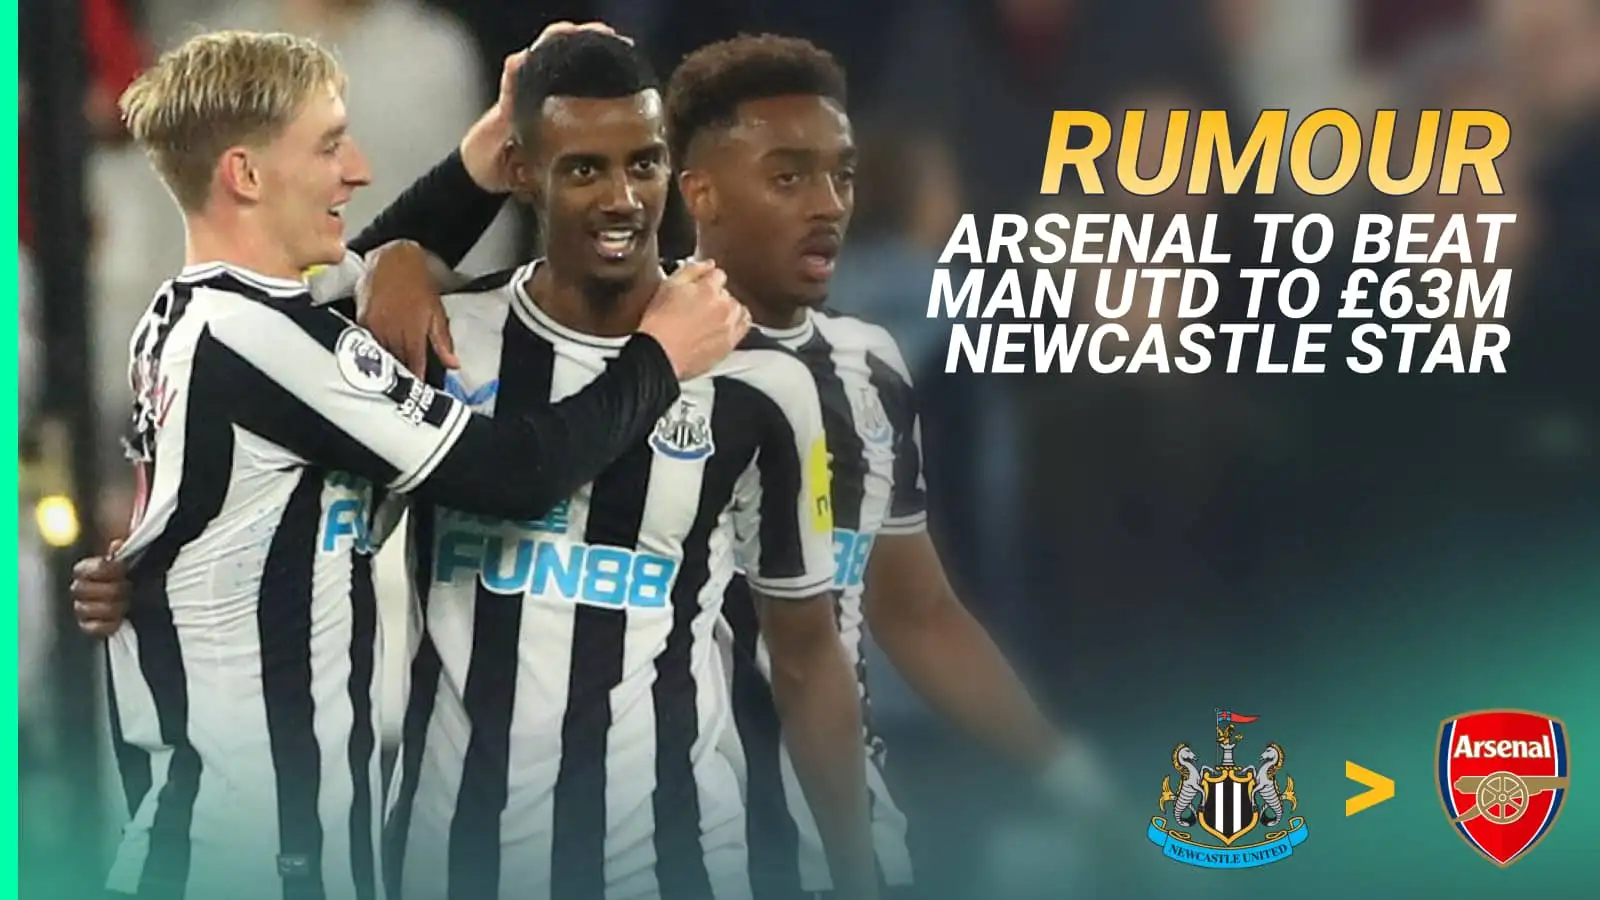 Man Utd hit by ‘transfer ban’ as Arsenal ‘push to sign’ brilliant Newcastle star in huge summer deal